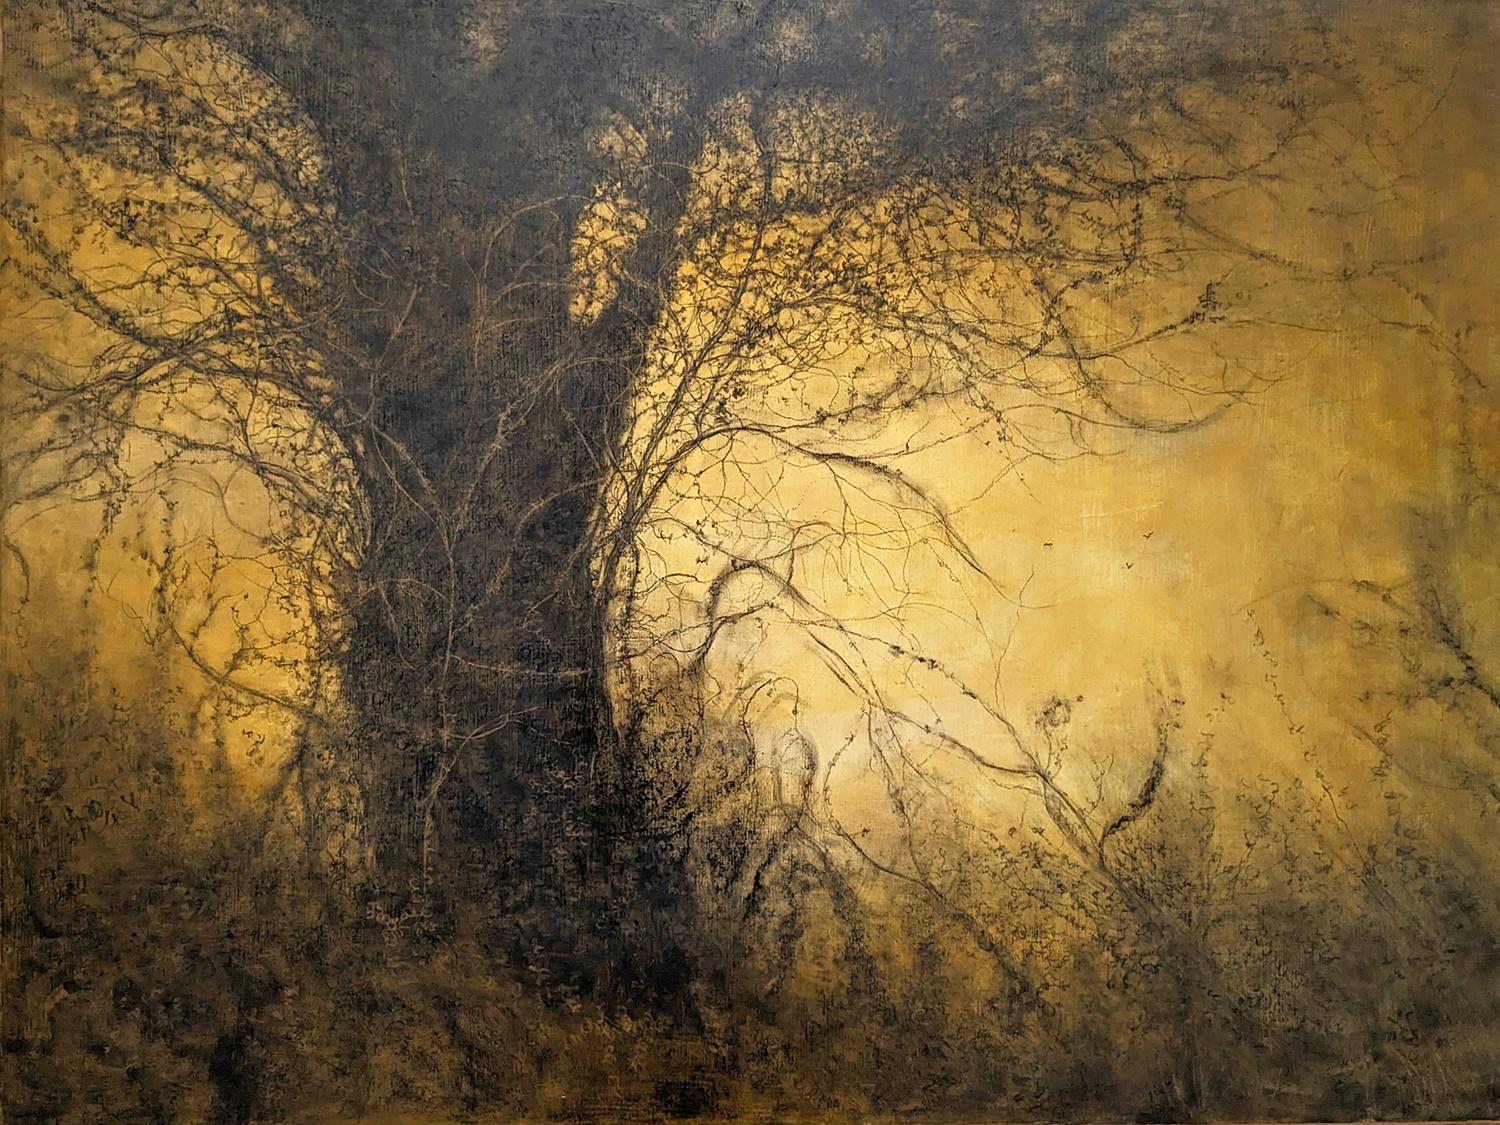 Sue Bryan Landscape Painting - The Golden Hour (Sun-Washed Landscape Charcoal Drawing of Trees in Forest)